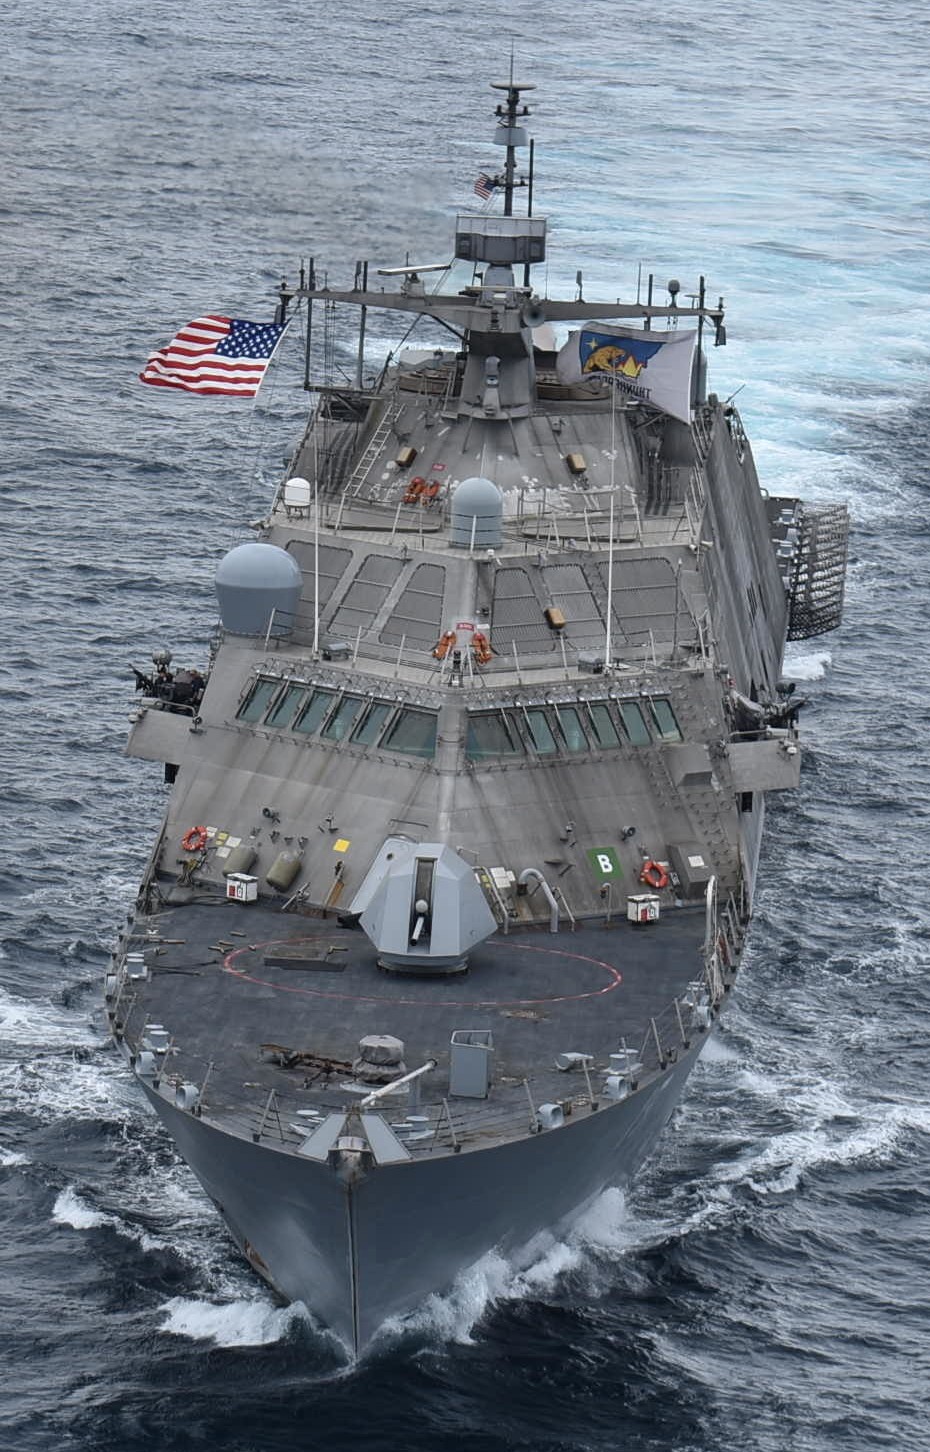 lcs-15 uss billings freedom class littoral combat ship us navy pacific ocean 88